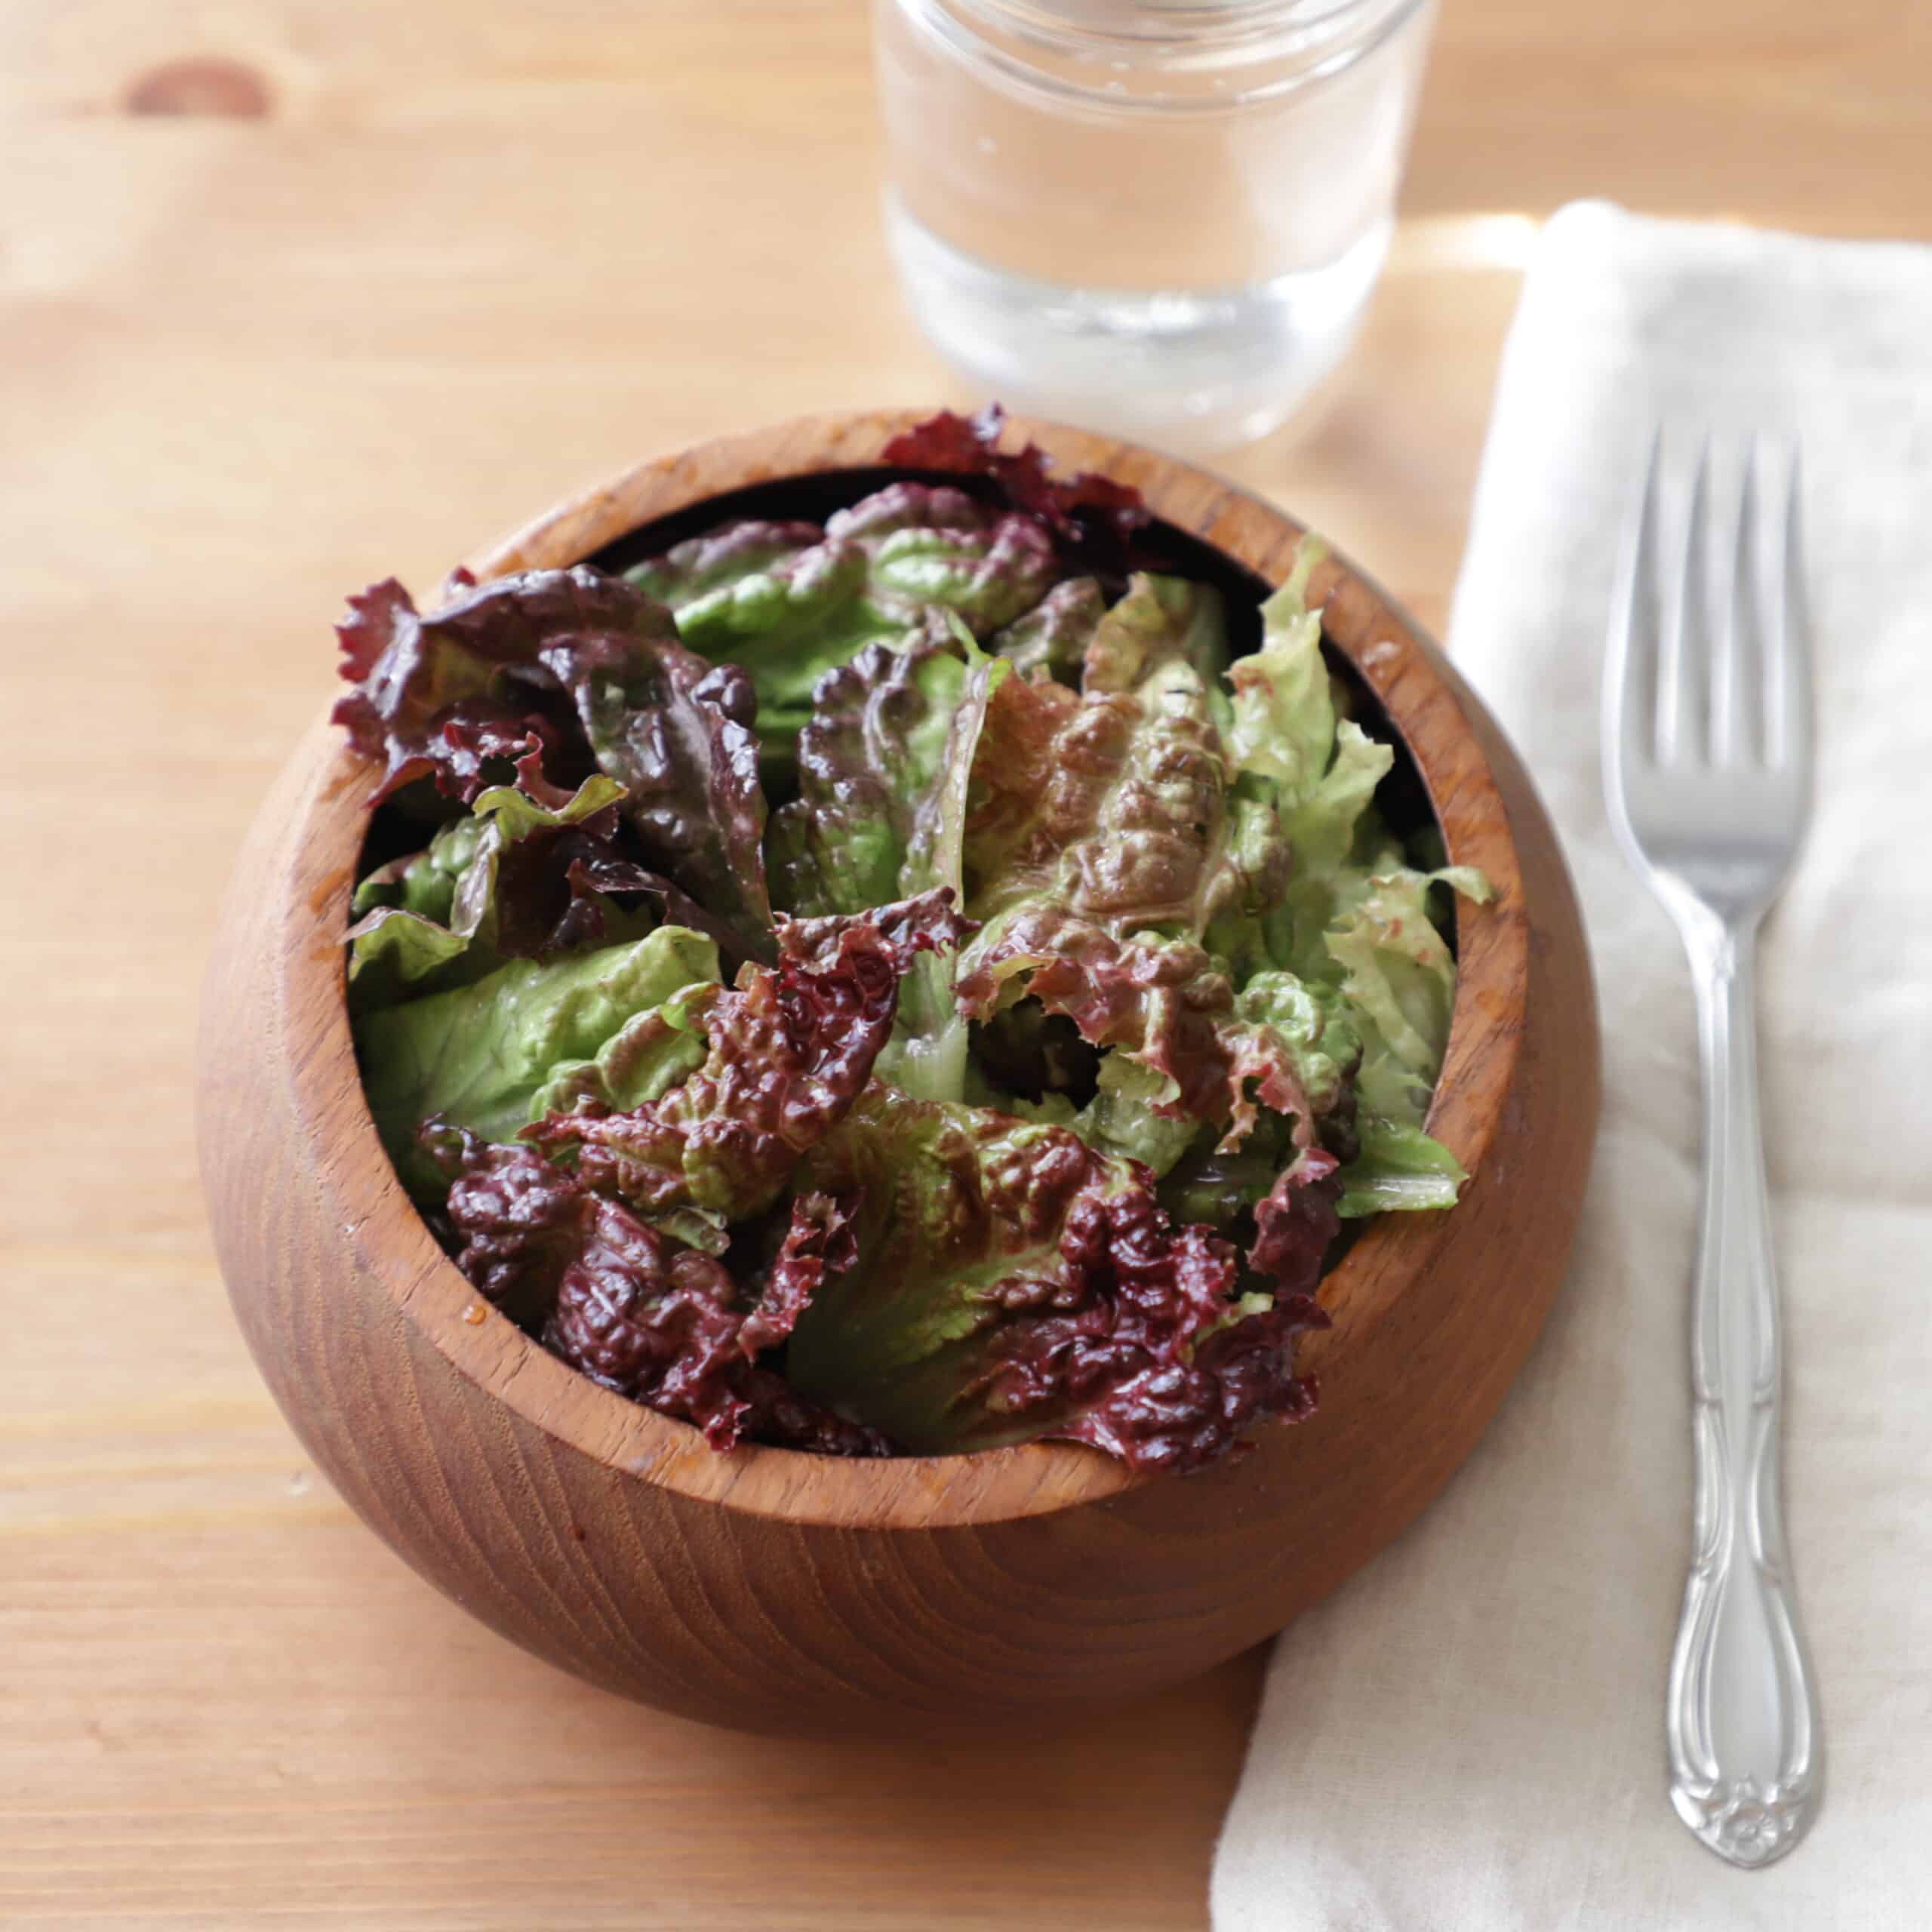 Rounded dark wooden bowl containing red leaf lettuce, next to a fork, napkin, glass of water and on a wooden surface.